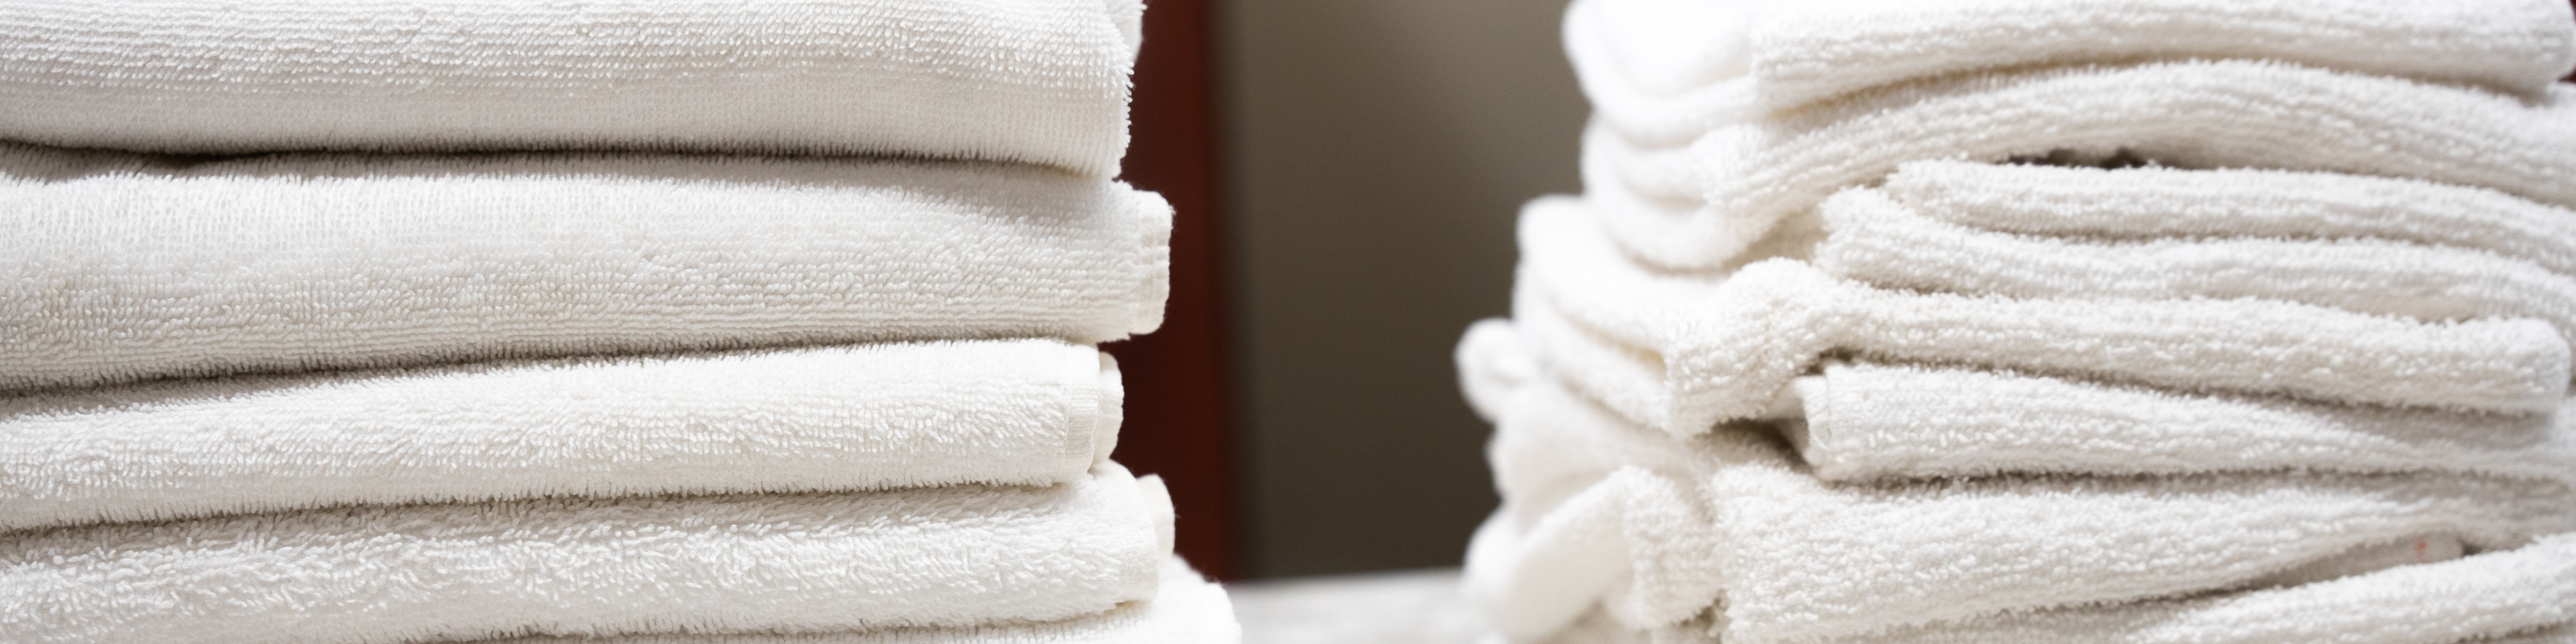 image for Towel Services